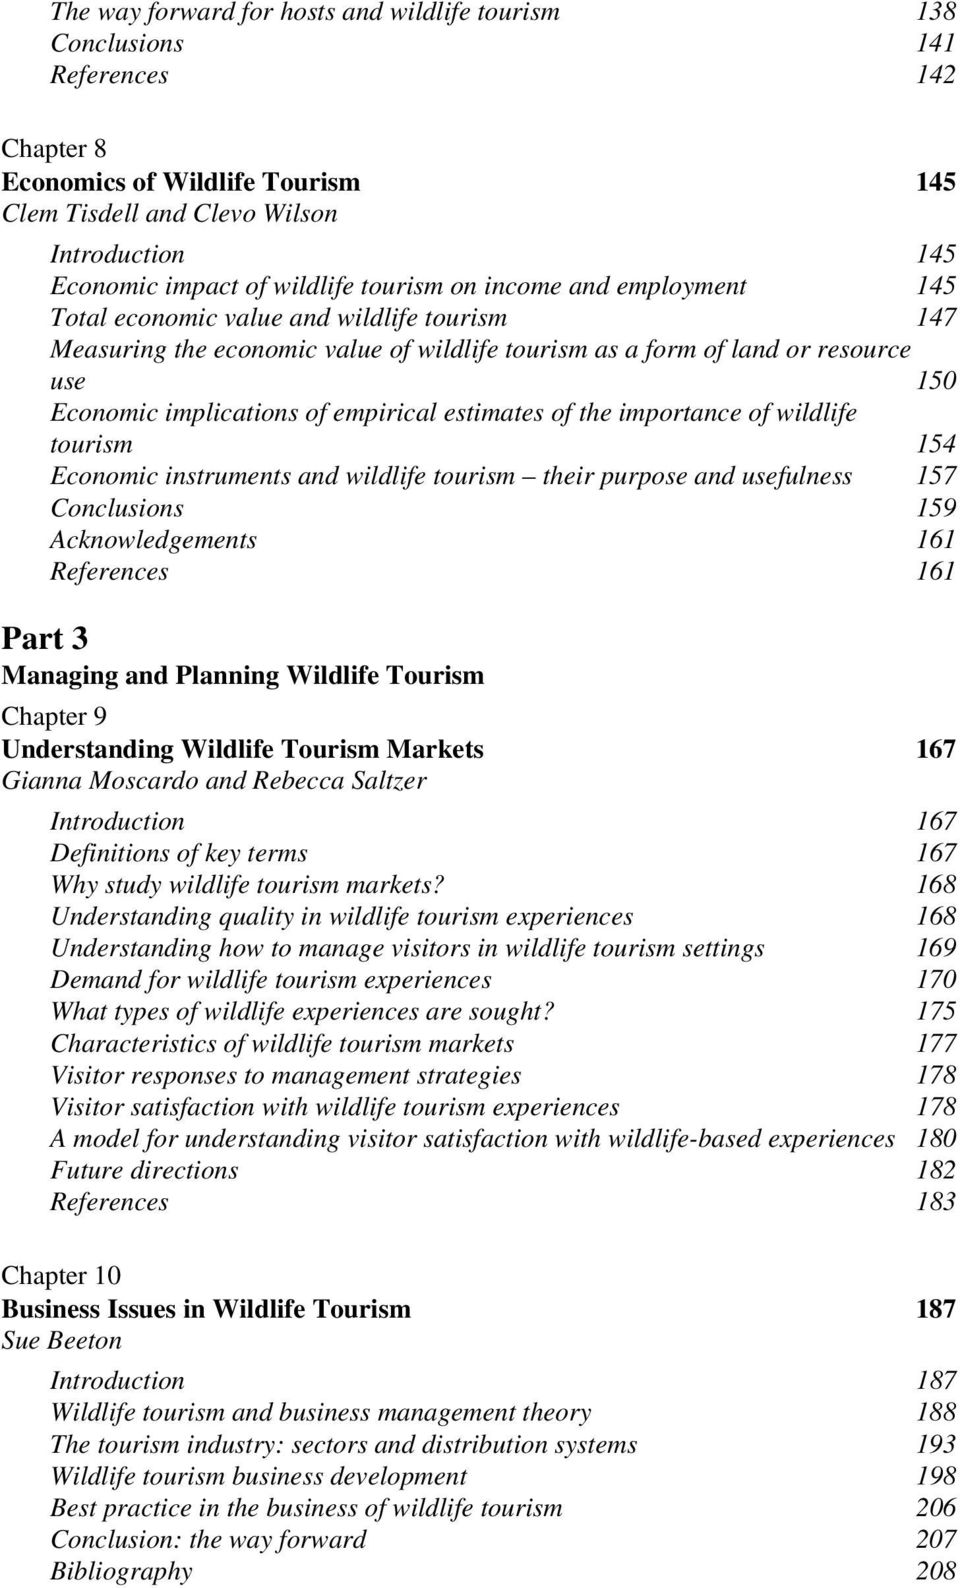 implications of empirical estimates of the importance of wildlife tourism 154 Economic instruments and wildlife tourism their purpose and usefulness 157 Conclusions 159 Acknowledgements 161